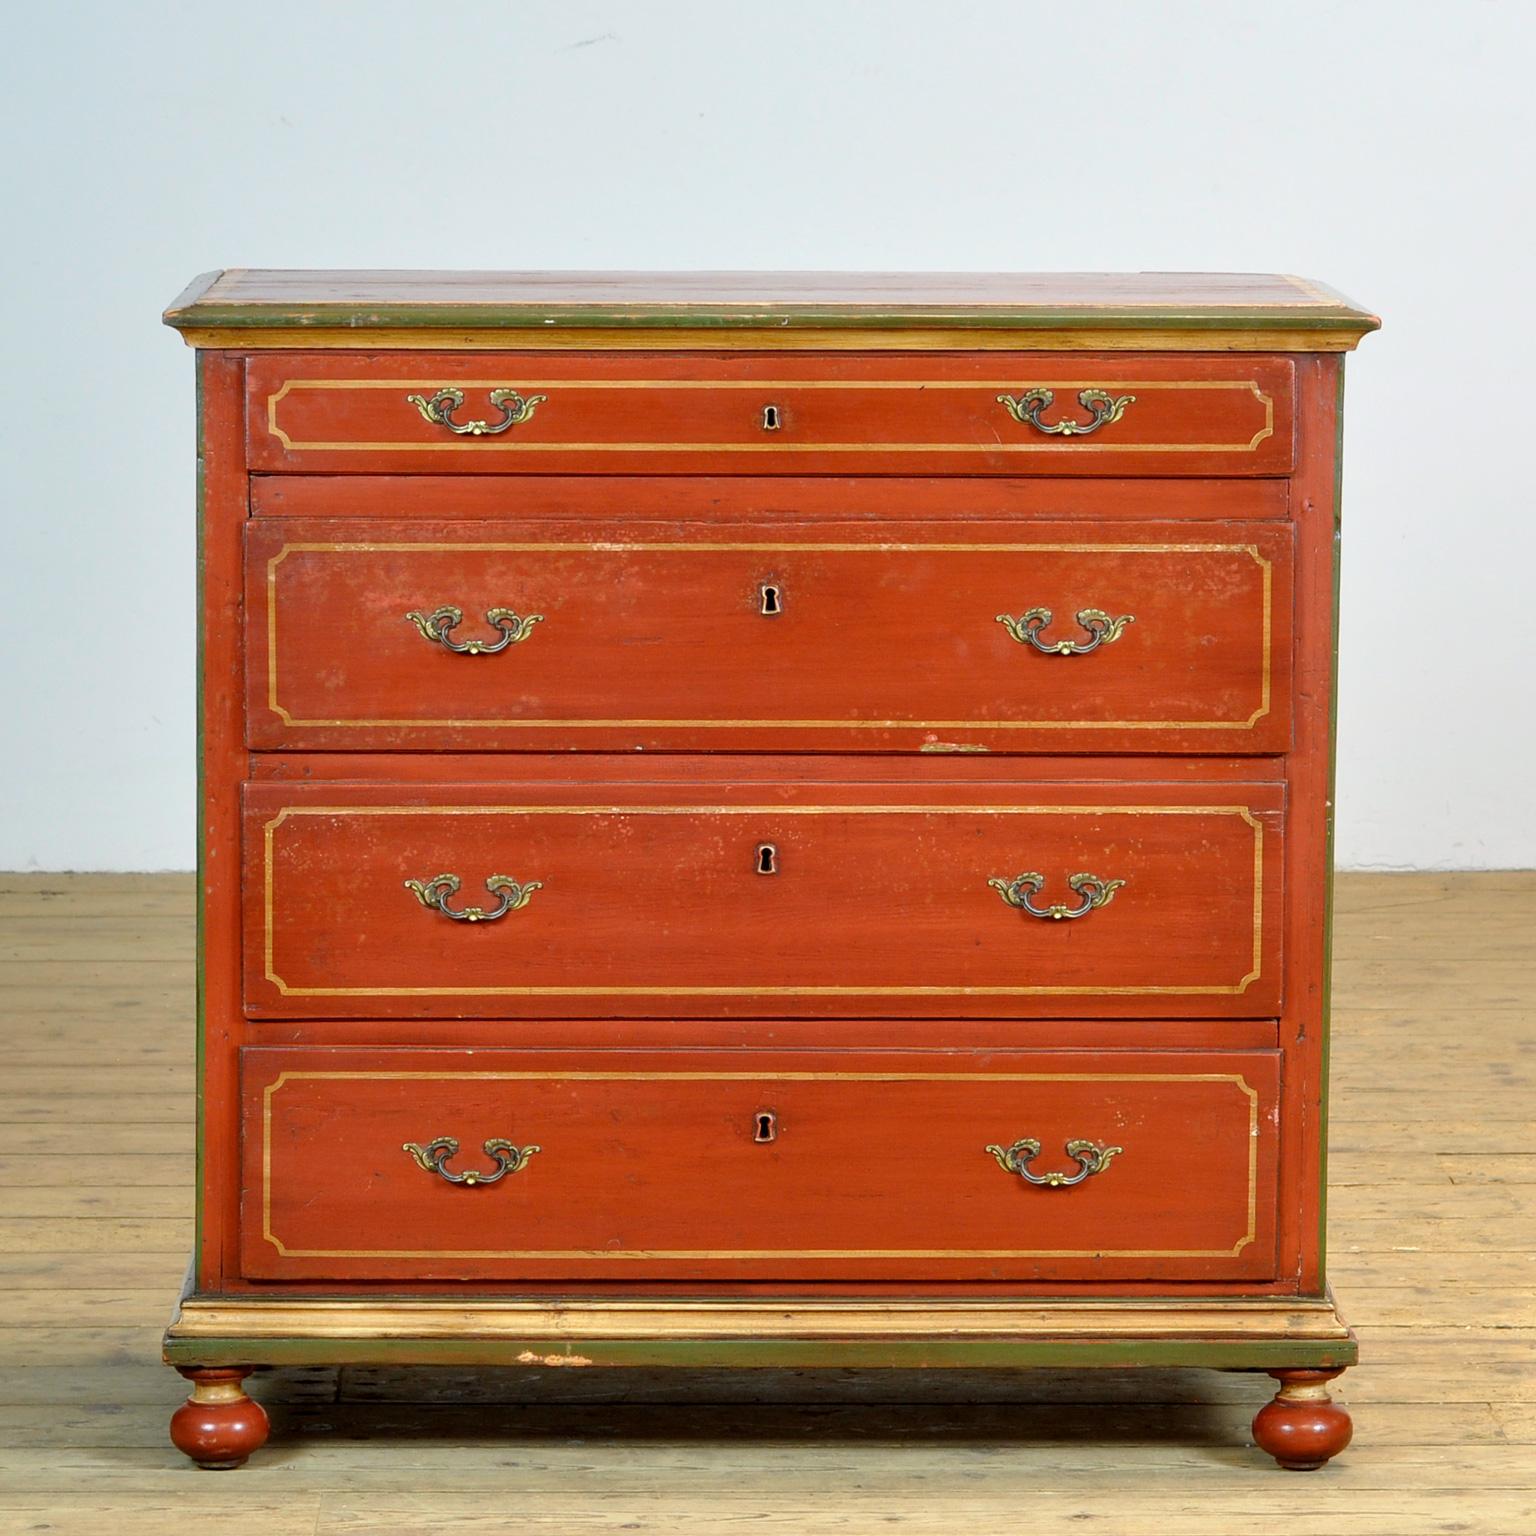 Chest of drawers made of pine, made in Germany circa 1920. The cabinet is painted in a beautiful red with green and yellow accents.
The cabinet has 4 drawers of which the top drawer is less high. The top drawer is divided into several compartments.